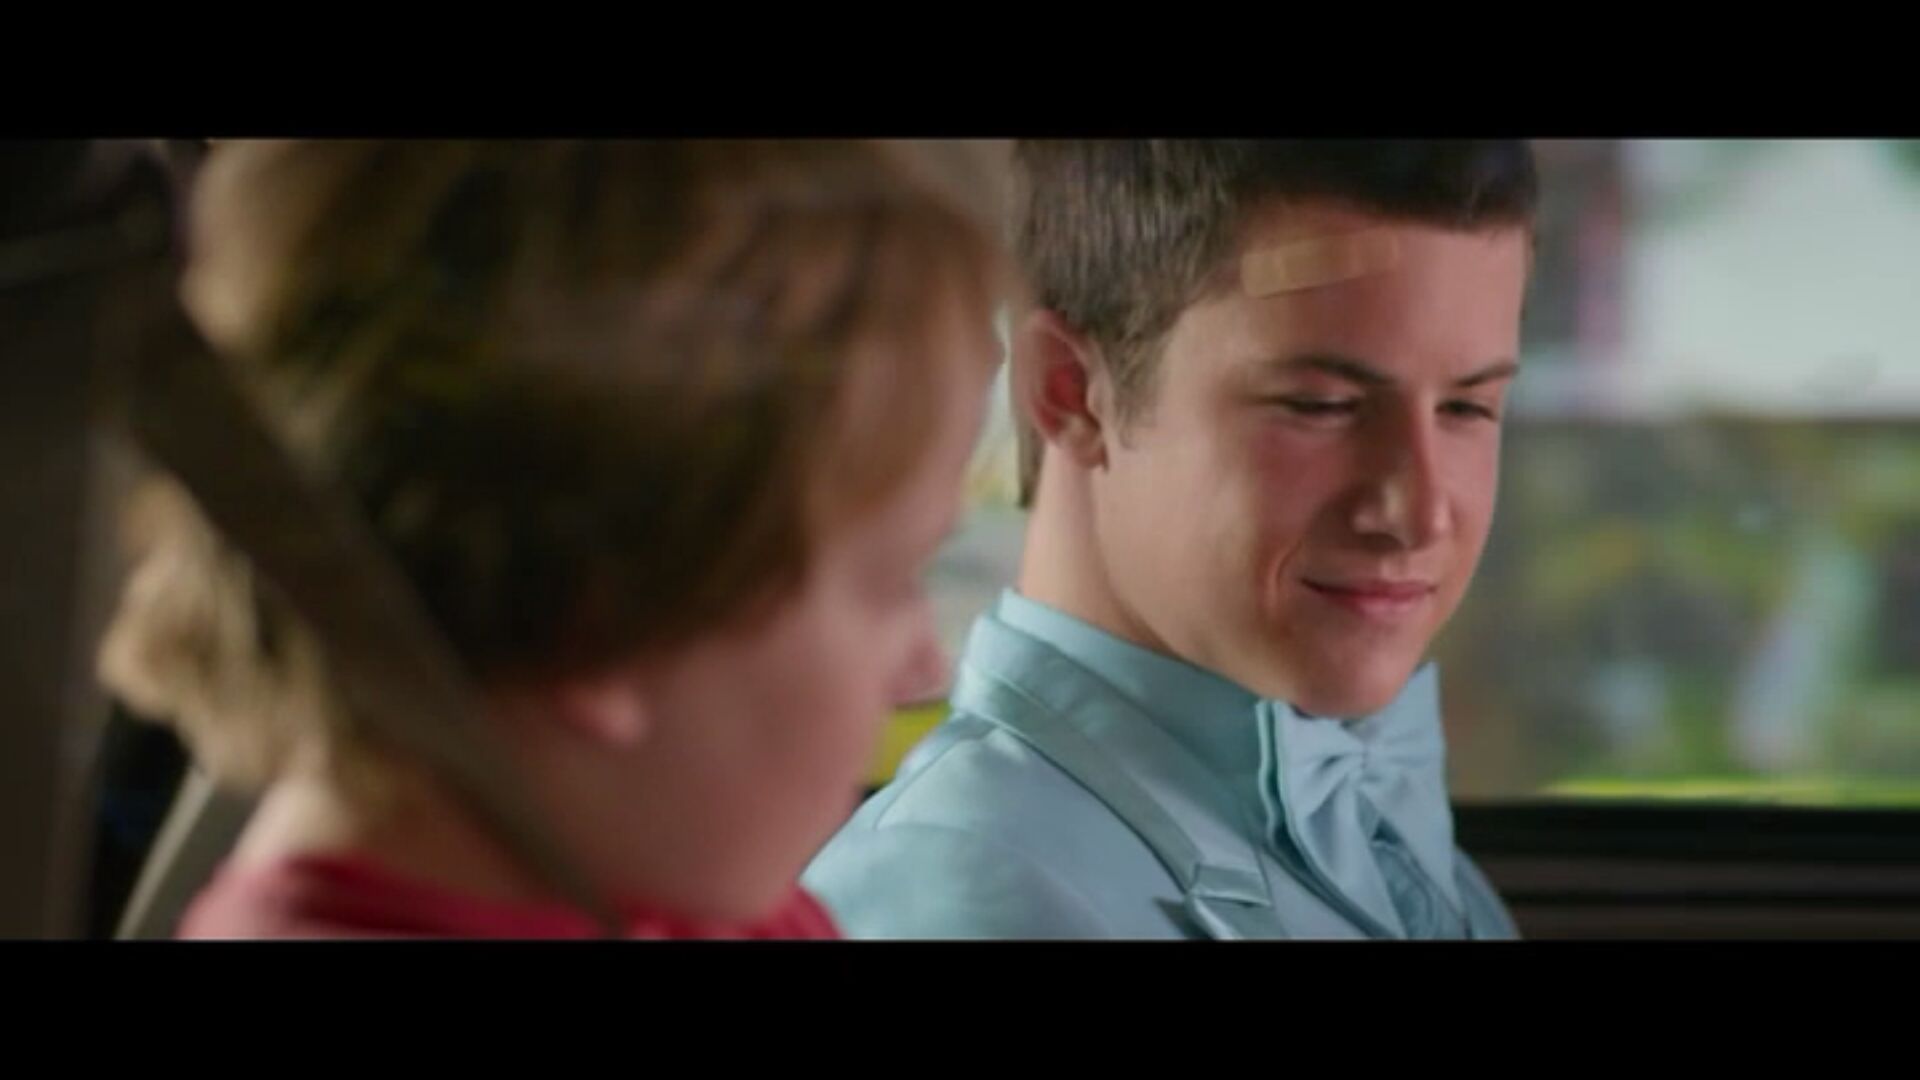 Dylan Minnette in Alexander and the Terrible, Horrible, No Good, Very Bad Day